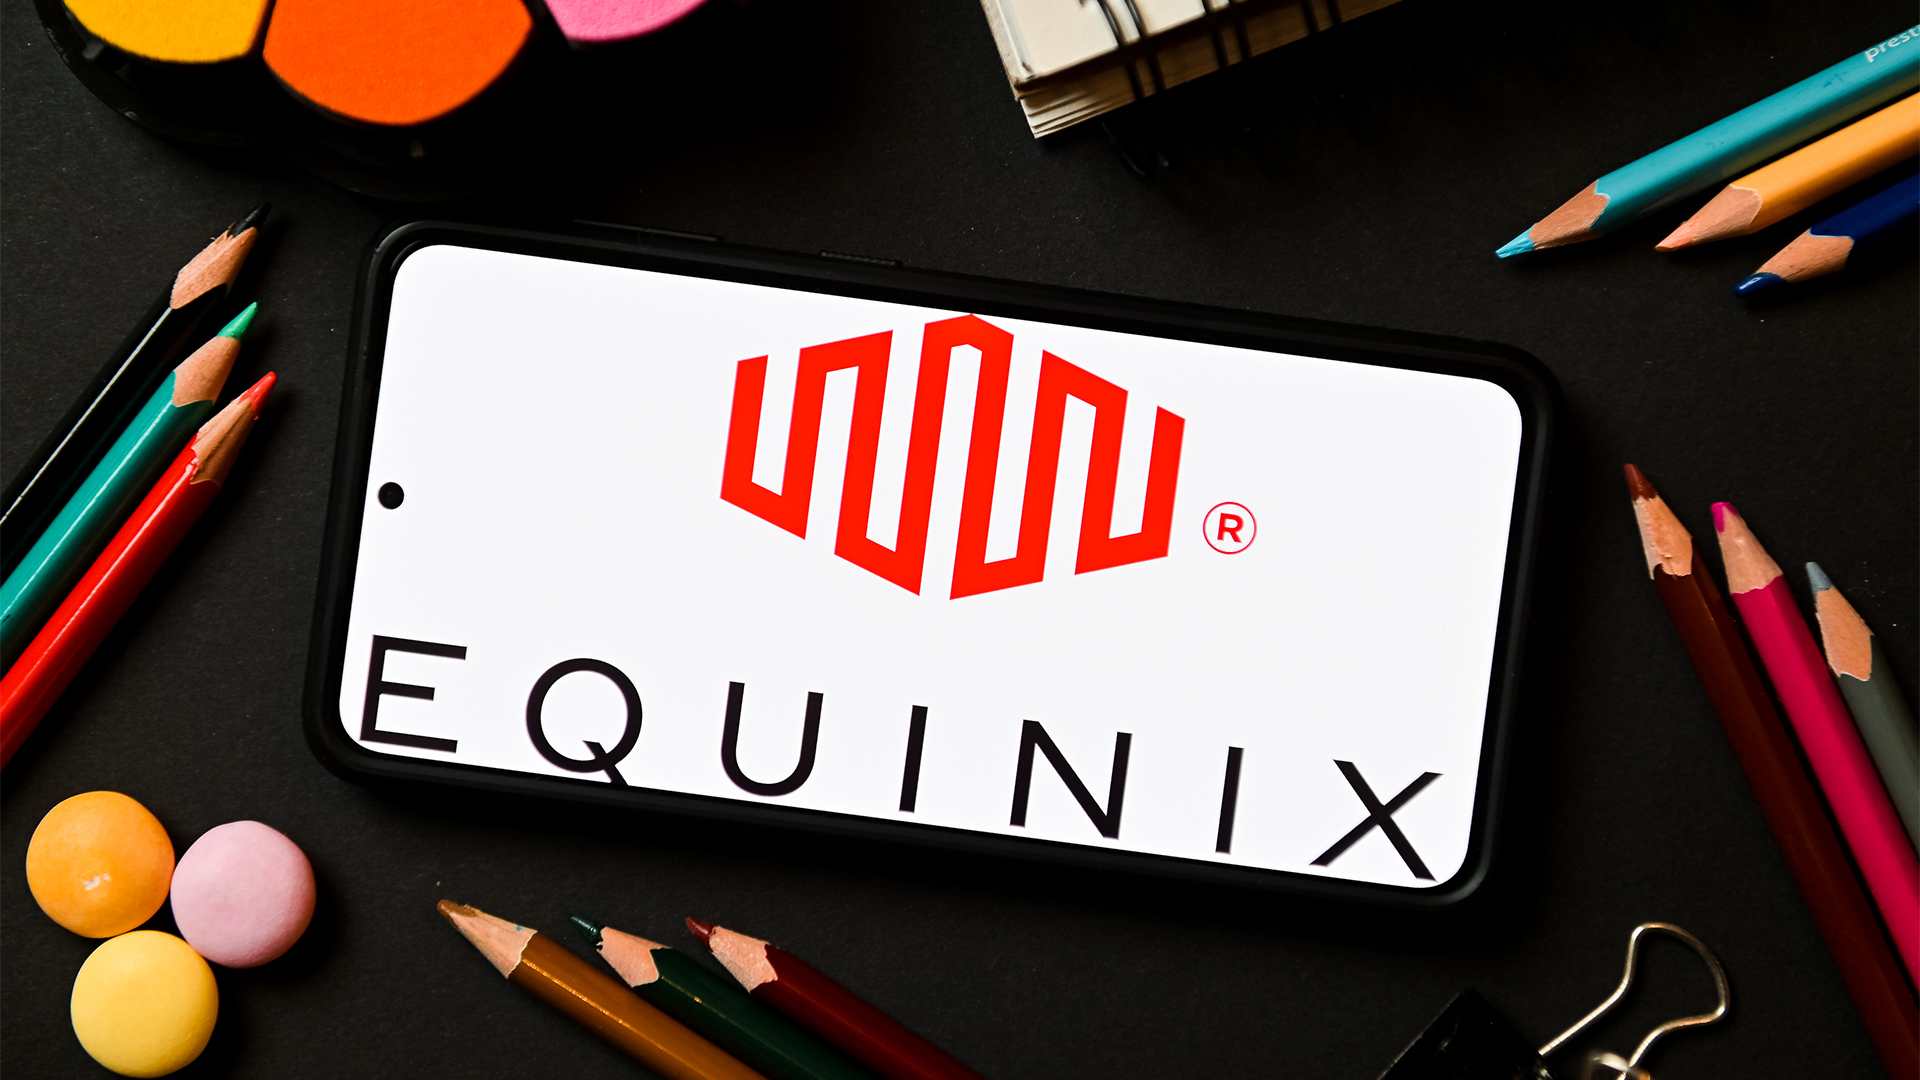 Equinix announces leadership changes and former Google executive joins as CEO